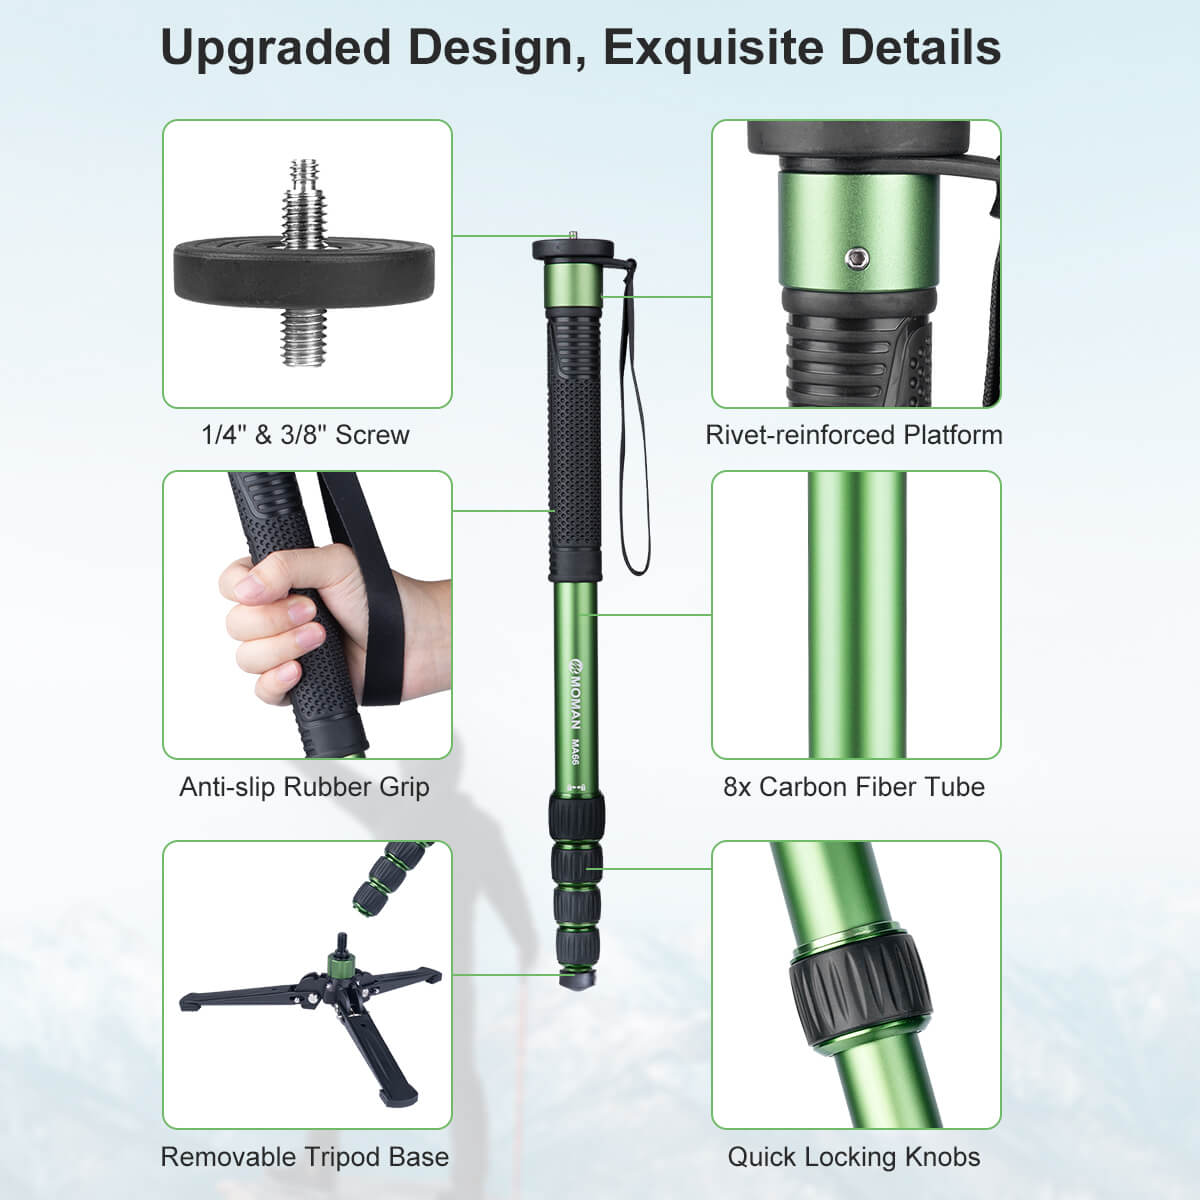 Moman self standing monopod MA66 features an upgraded design and exquisite details, like anti-slip rubber grip and more.